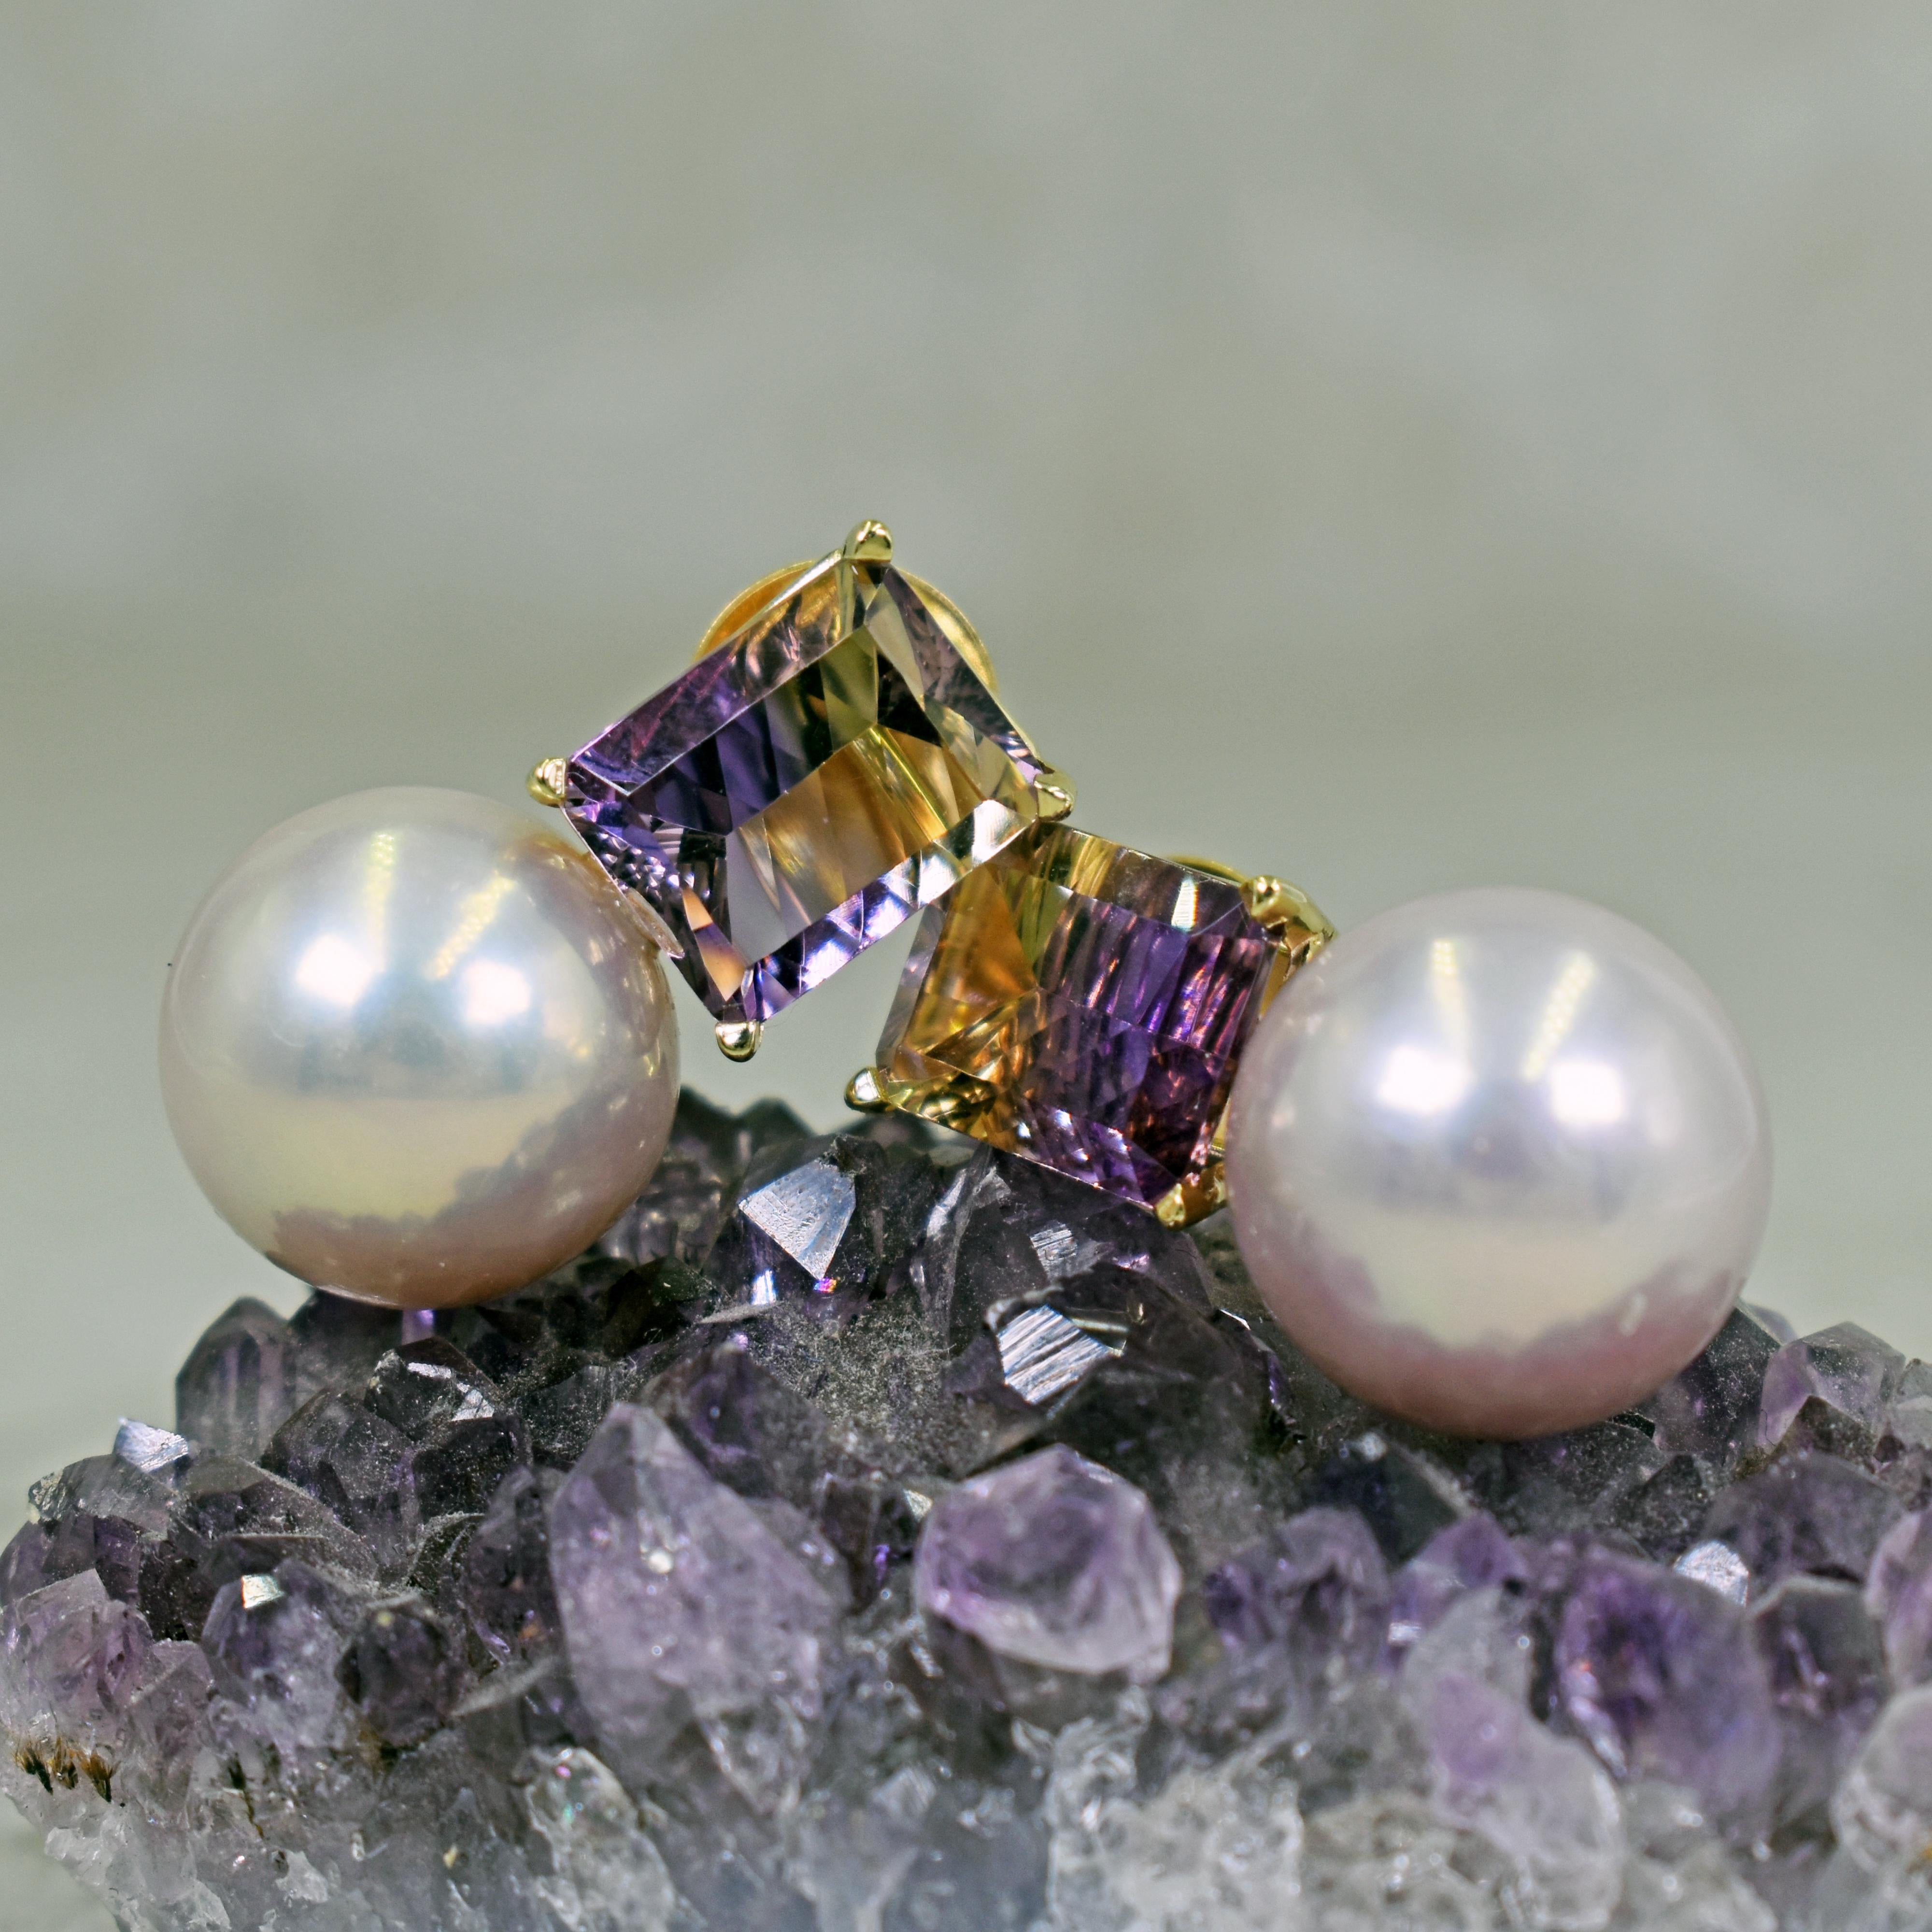 Beautiful, contemporary 14k yellow gold stud earrings featuring two fantasy, emerald cut Ametrine gemstones, totaling 6.36 carats, with 13.5mm pinkish purple Freshwater Pearl drops. Stud earrings are 0.94 inches or 24mm in length. Gorgeous and